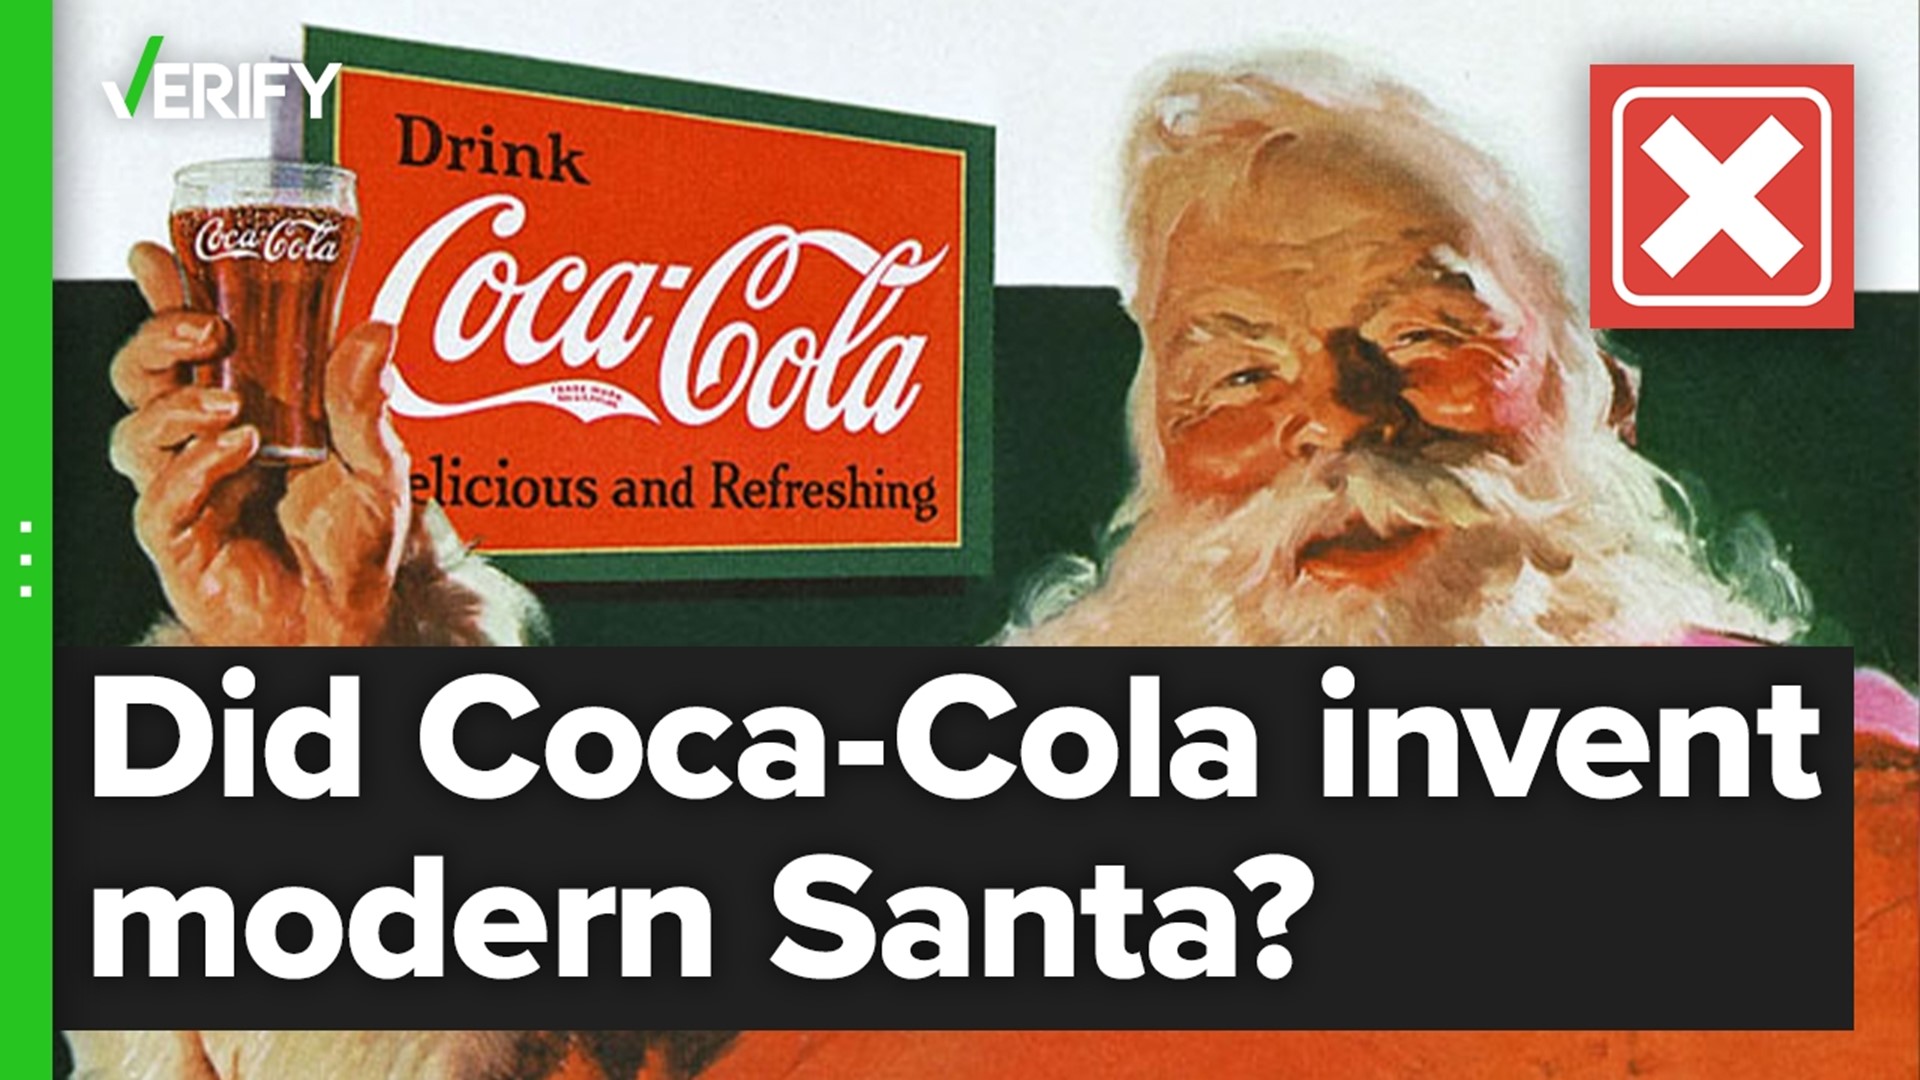 Did Coca-Cola invent the modern image of Santa? The VERIFY team confirms this is false.